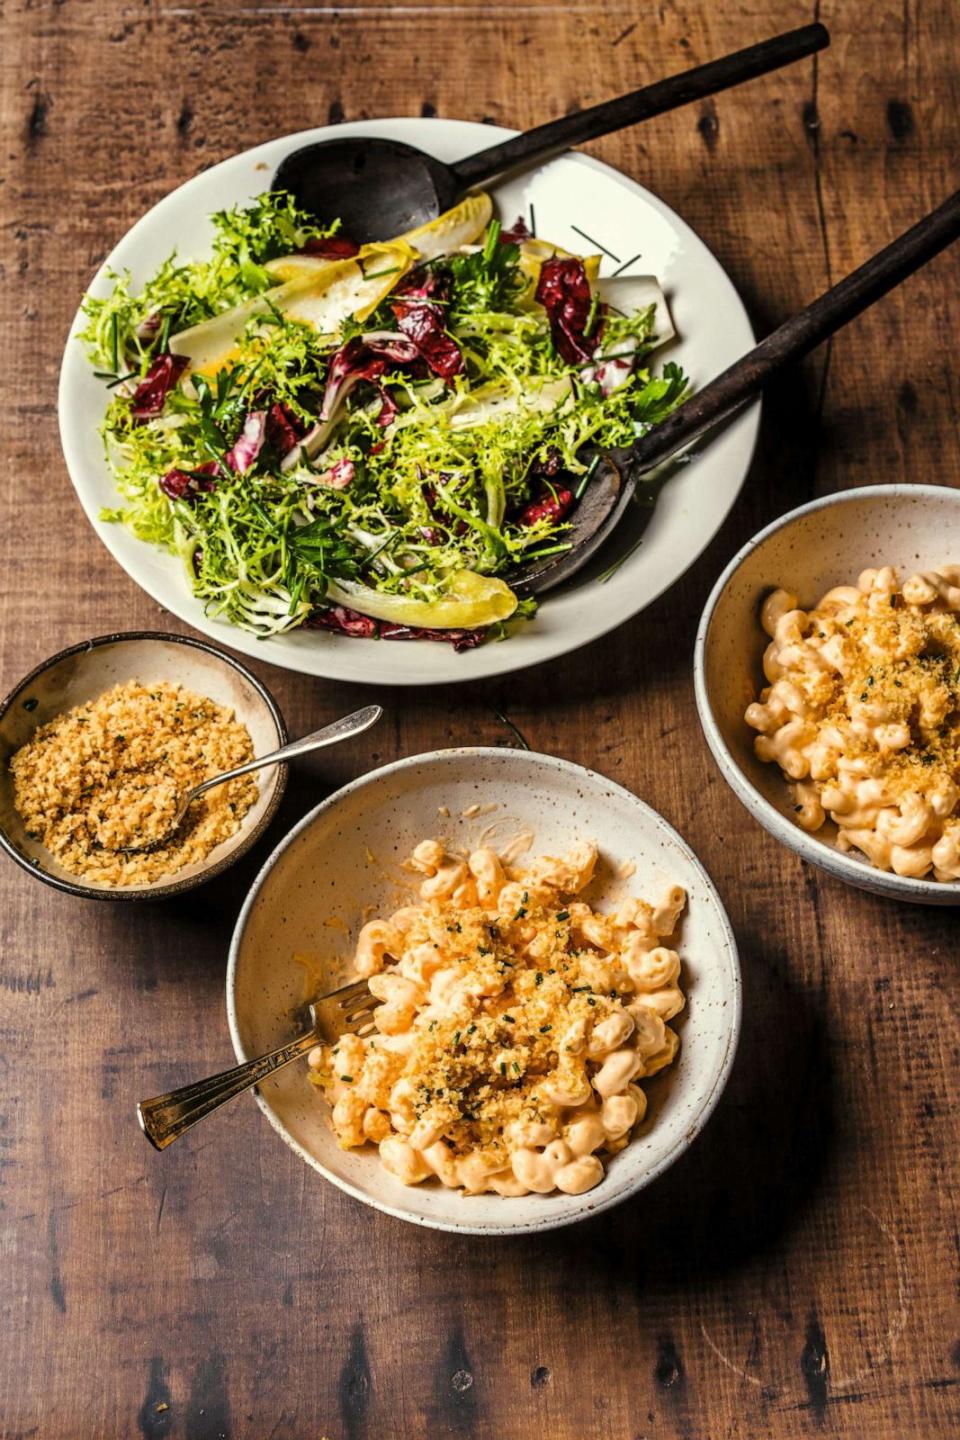 PHOTO: Stovetop mac and cheese with a bitter greens salad from Michael Symon's new cookbook. (Ed Anderson)